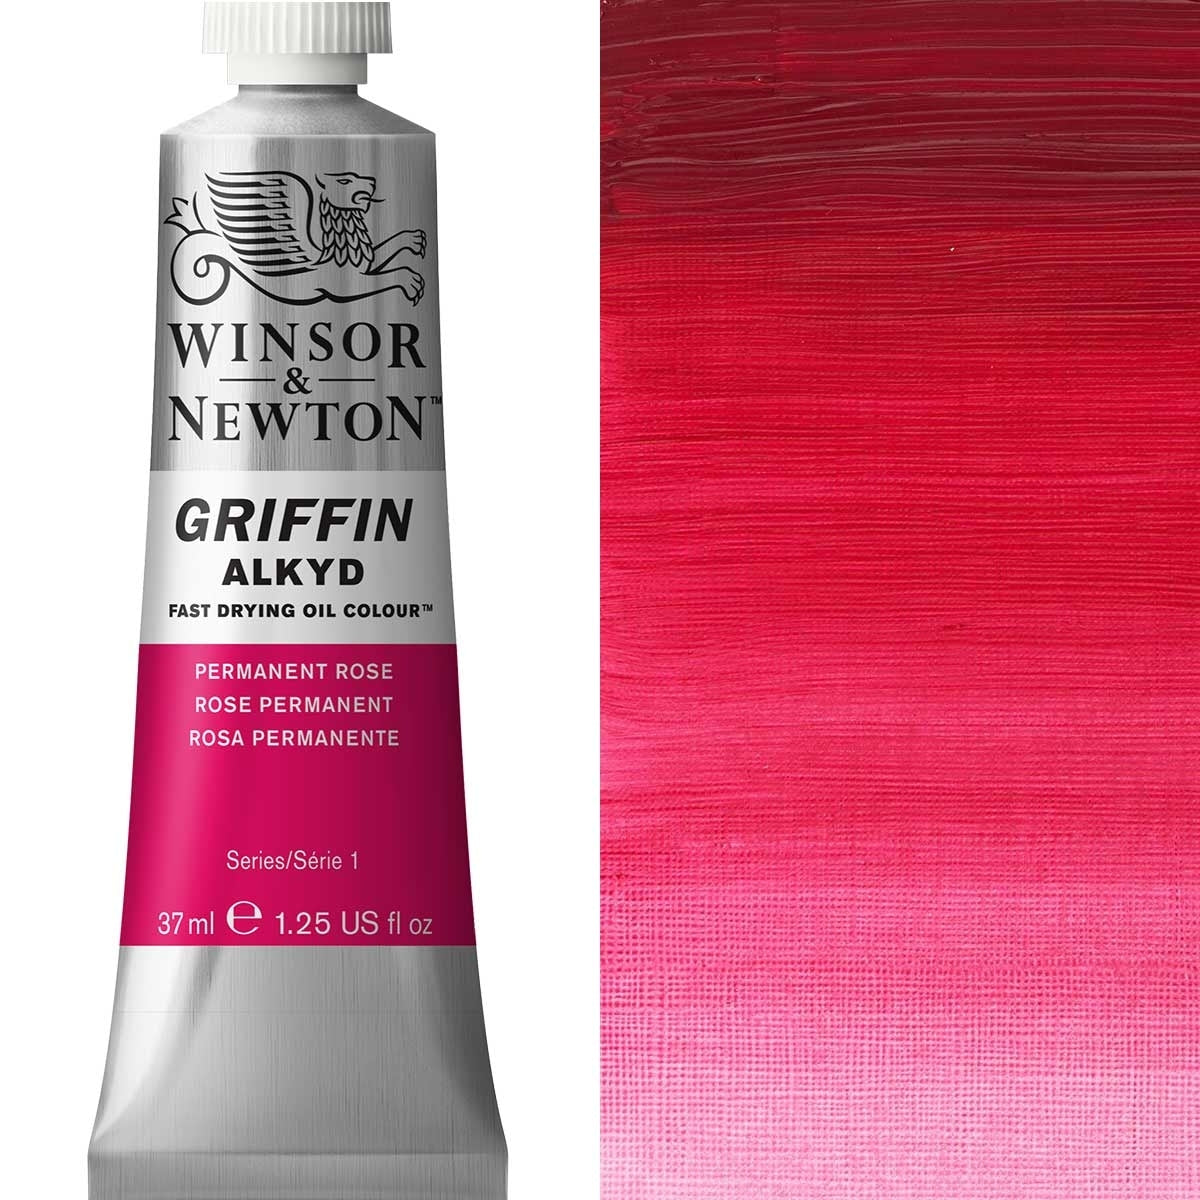 Winsor and Newton - Griffin ALKYD Oil Colour - 37ml - Permanent Rose